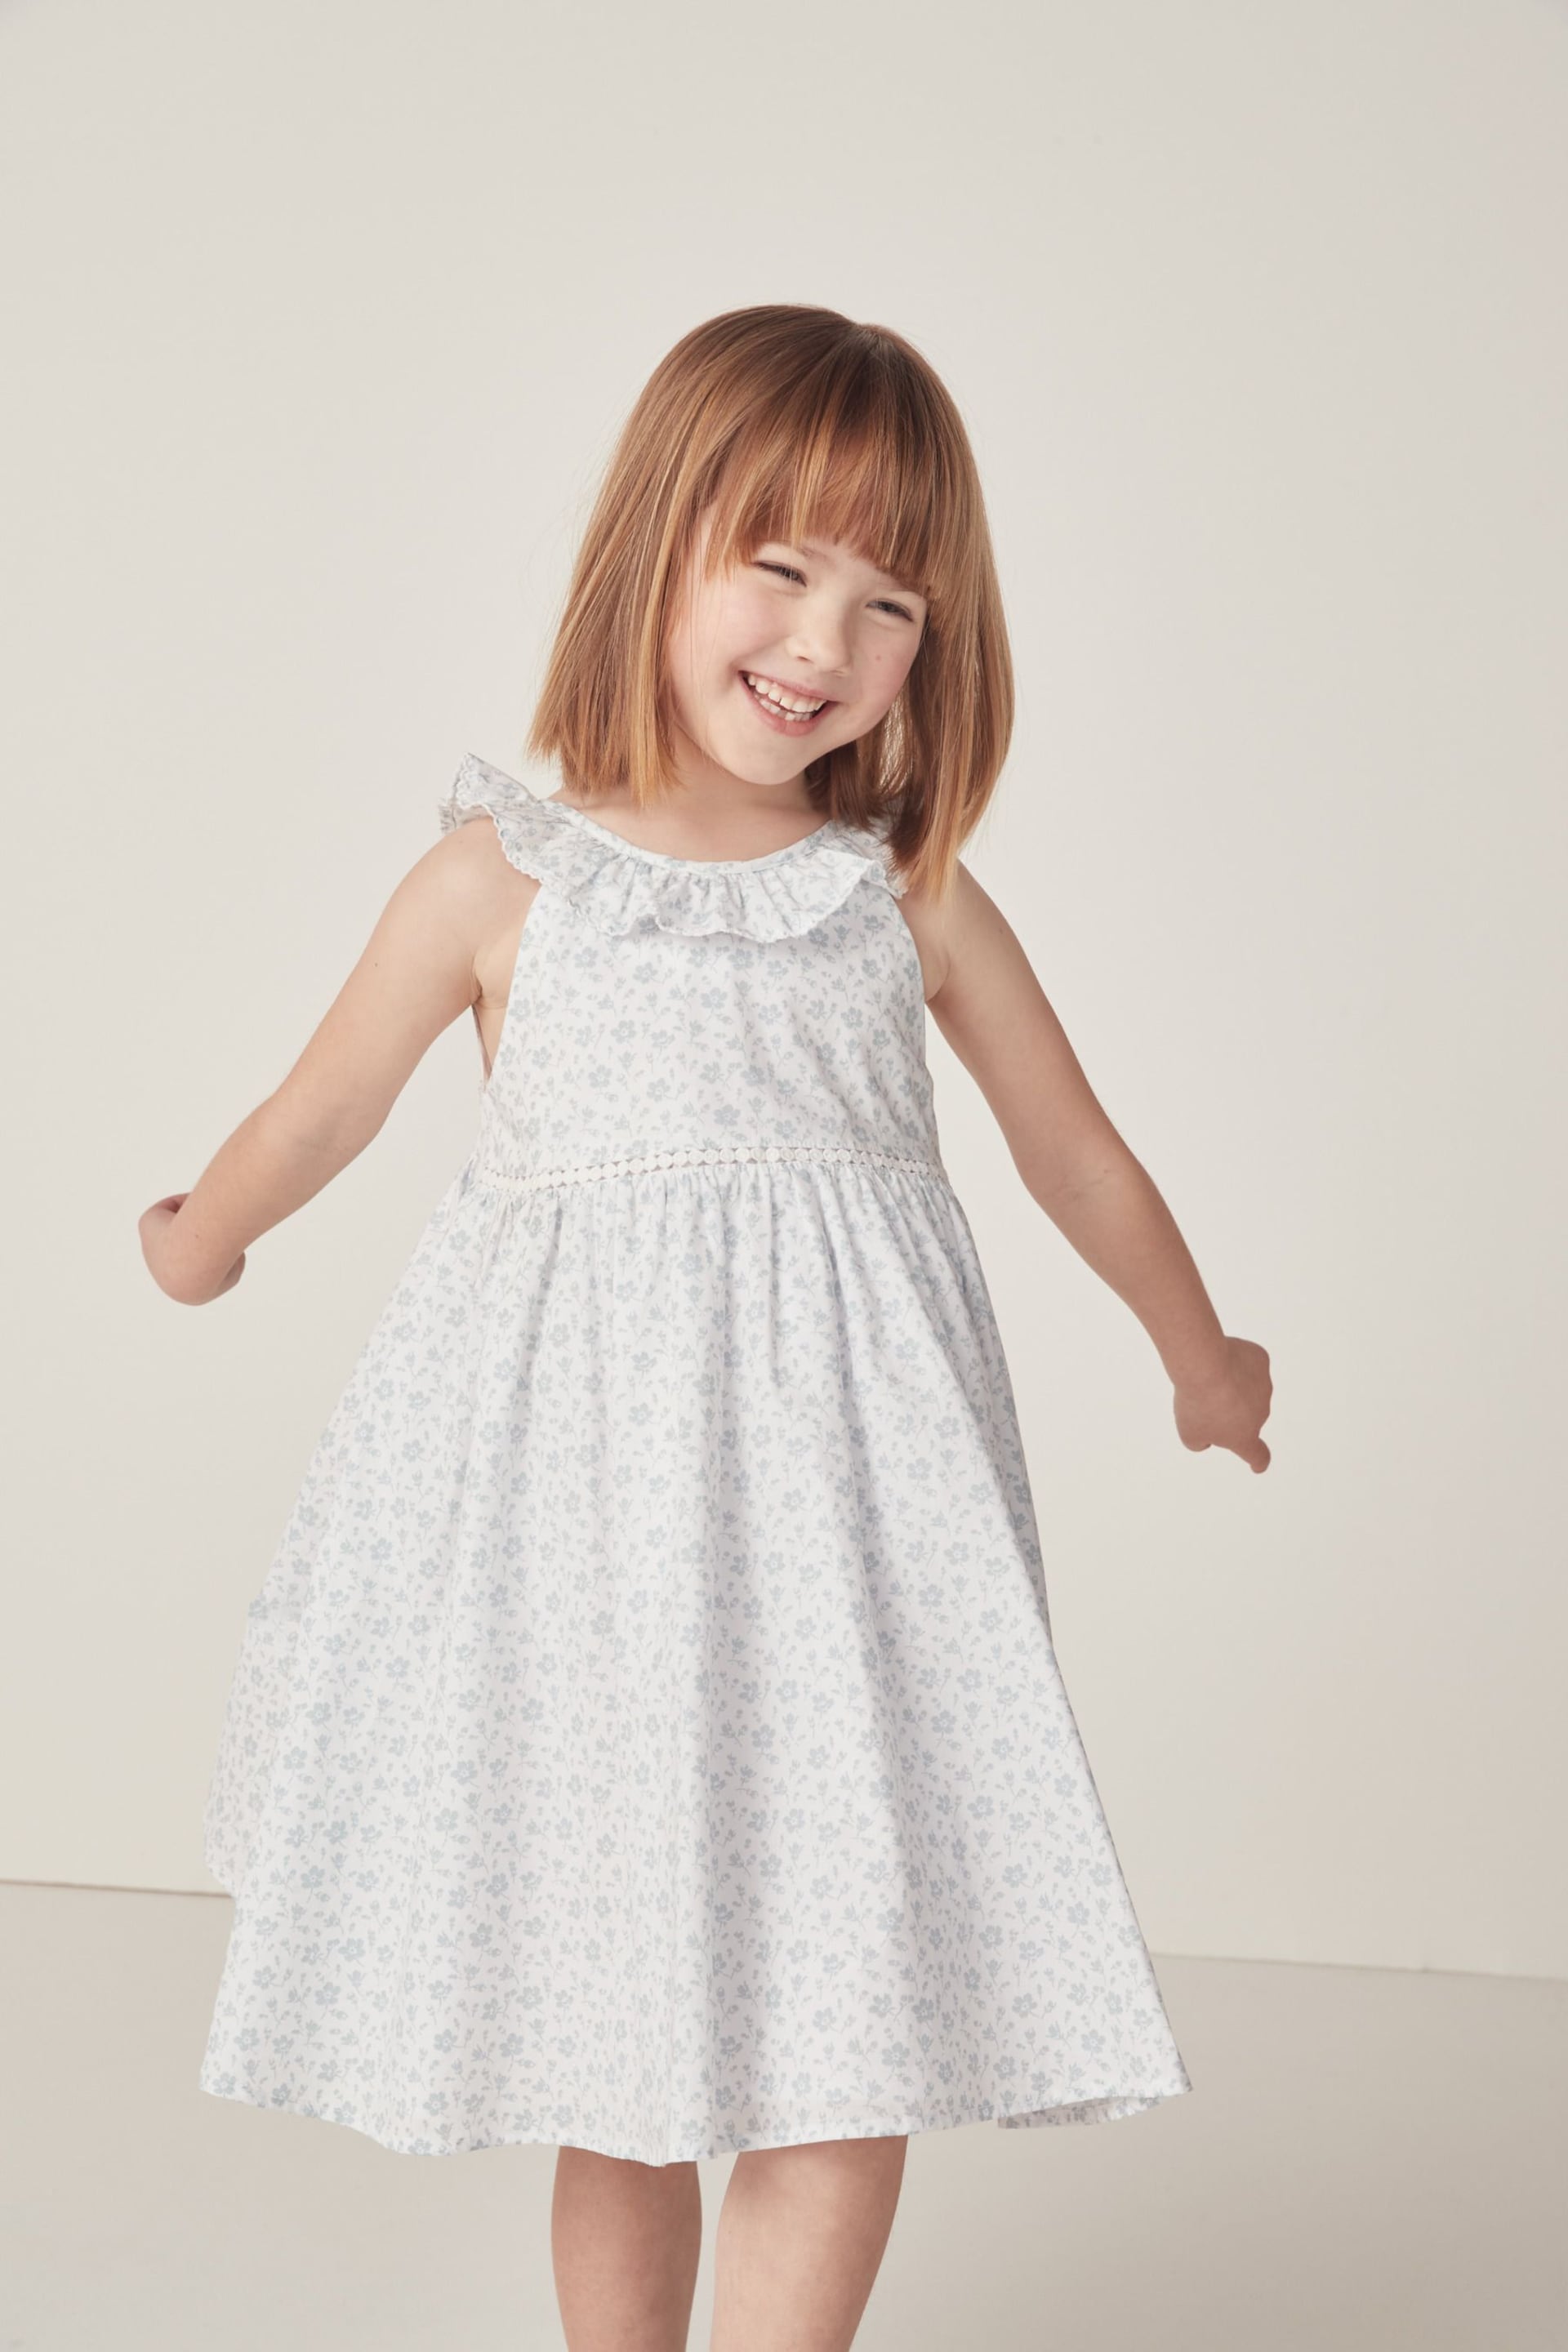 The White Company Blue Margot Floral Organic Cotton Swing Dress - Image 1 of 12